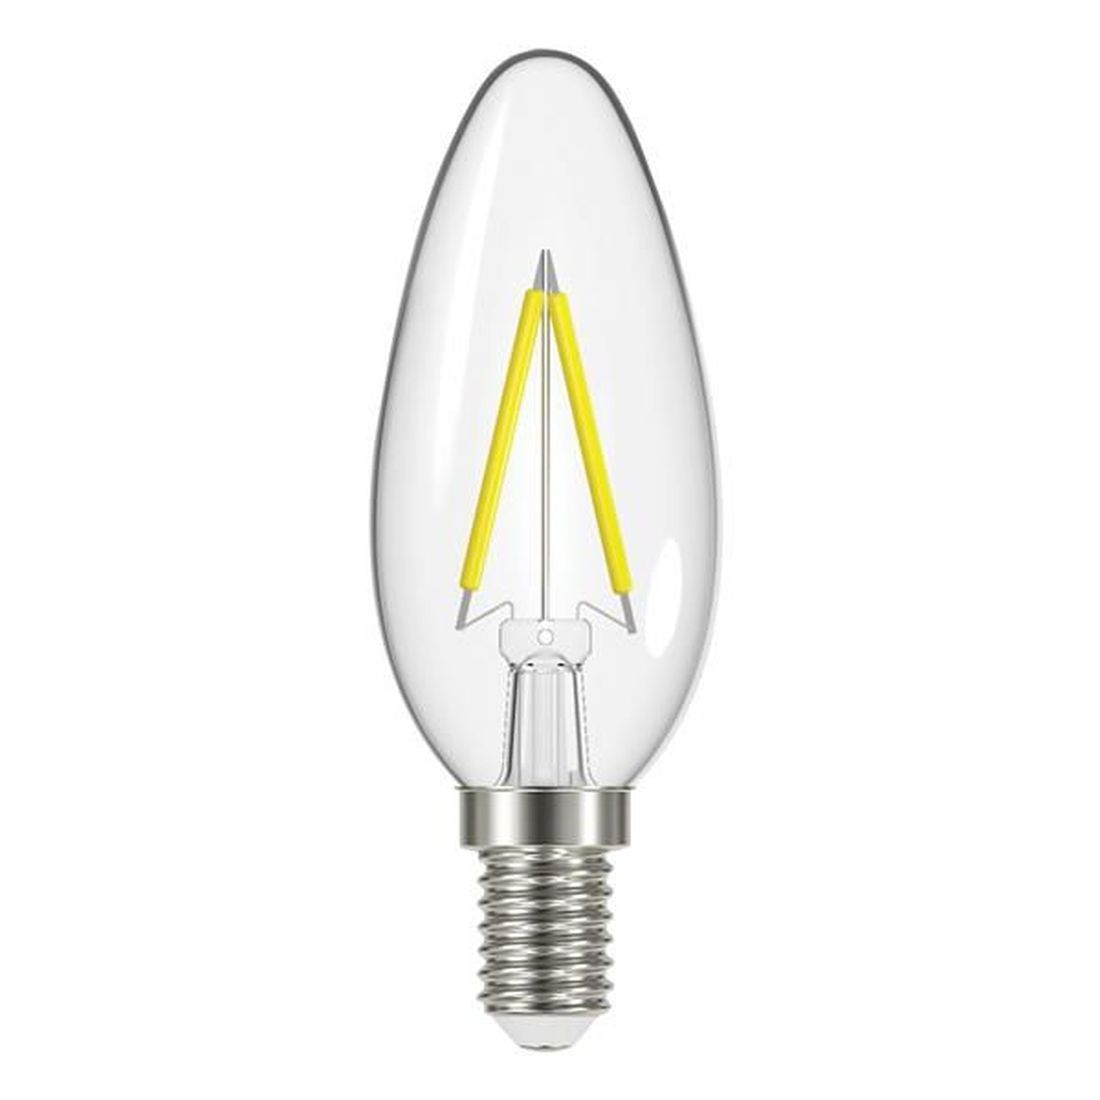 Energizer LED SES (E14) Candle Filament Dimmable Bulb, Warm White 470 lm 4.8W             